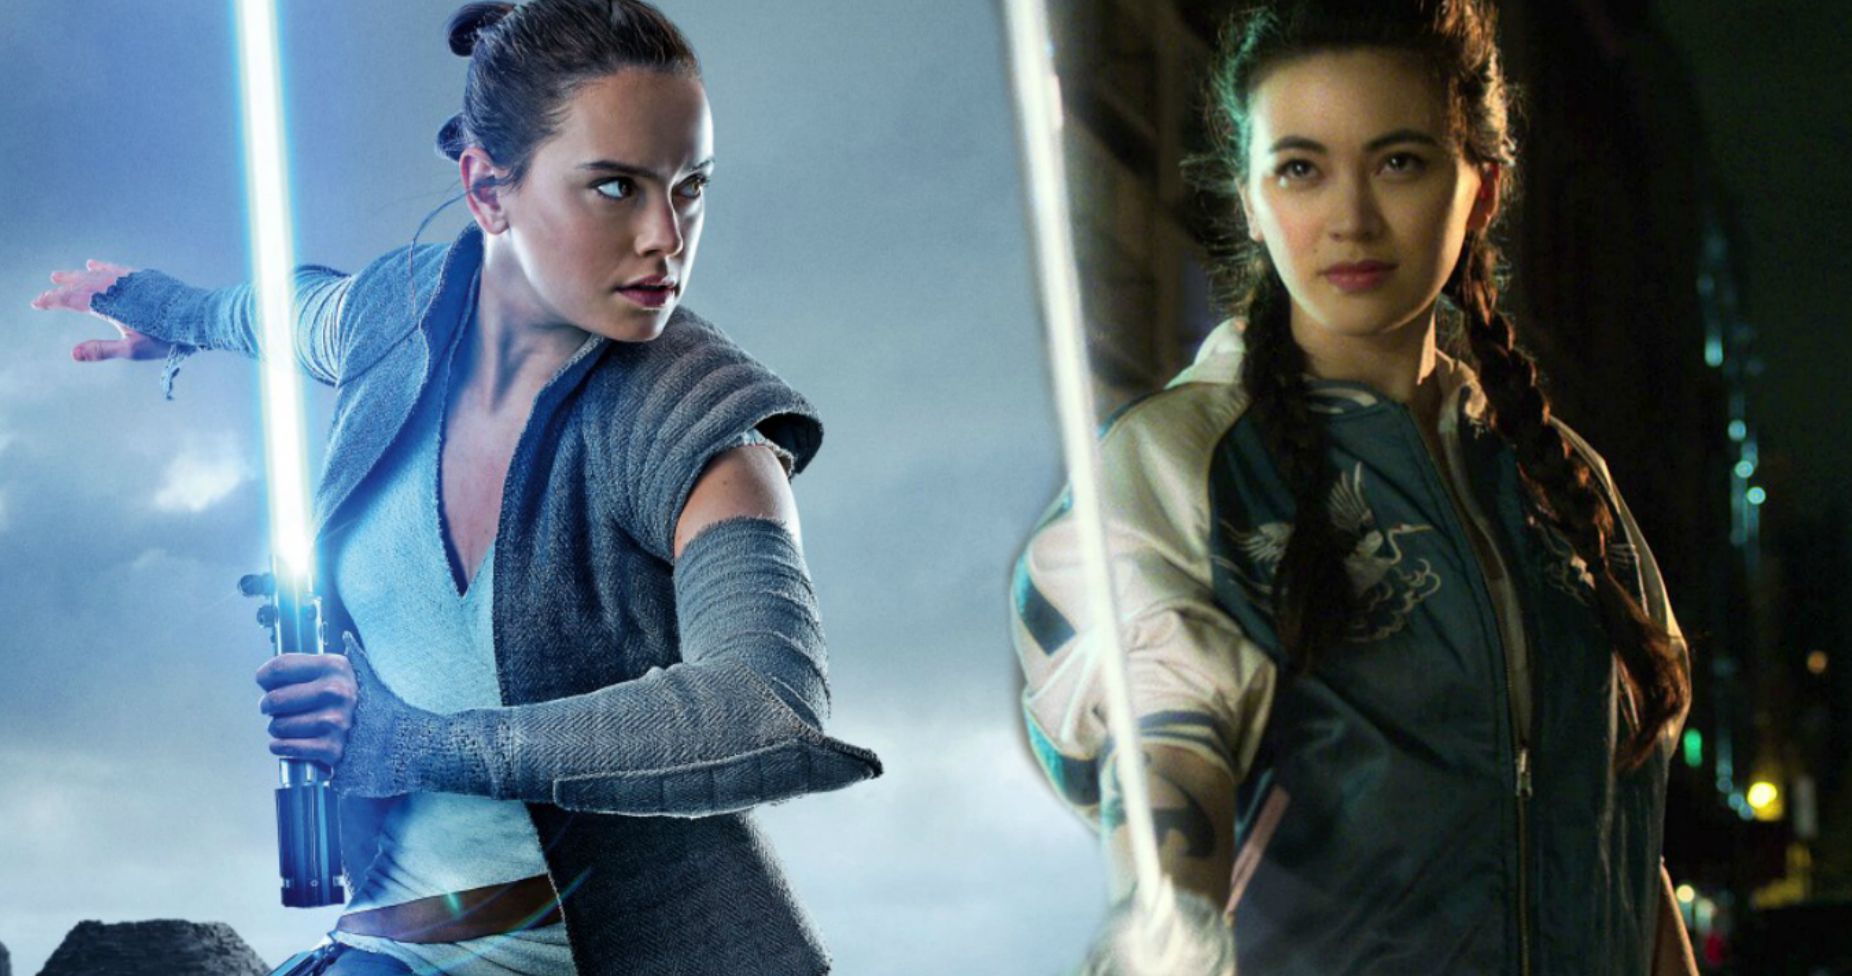 Iron Fist Star Jessica Henwick Almost Played Rey in Star Wars After 6-Month Audition